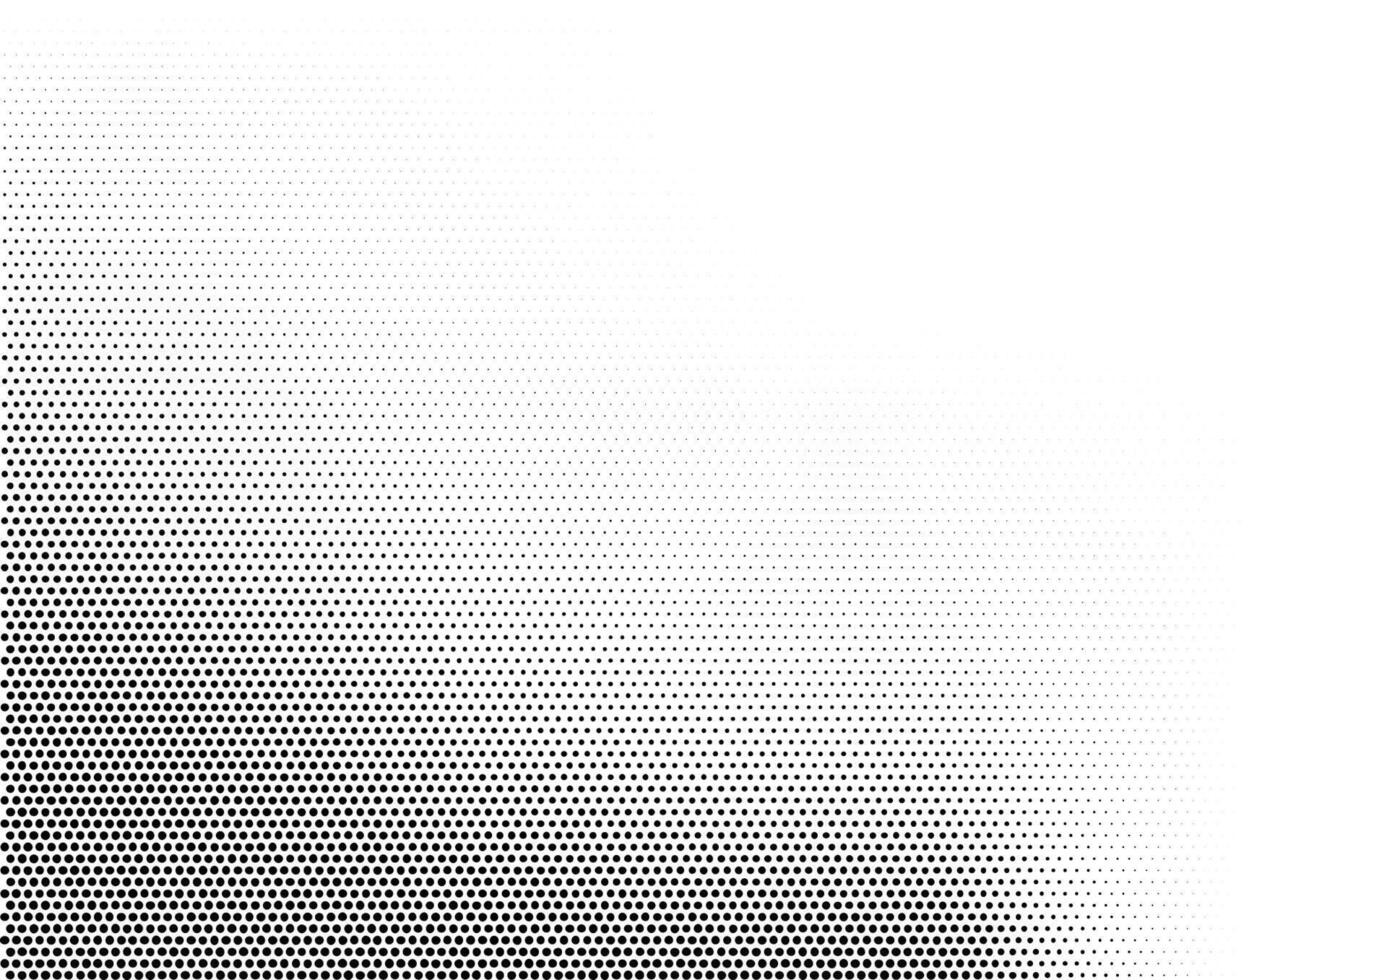 Abstract horizontal halftone monochrome background with dots of different size accumulated in left bottom angle. Grunge gradient dotted texture. Modern vector illustration in black and white colors.